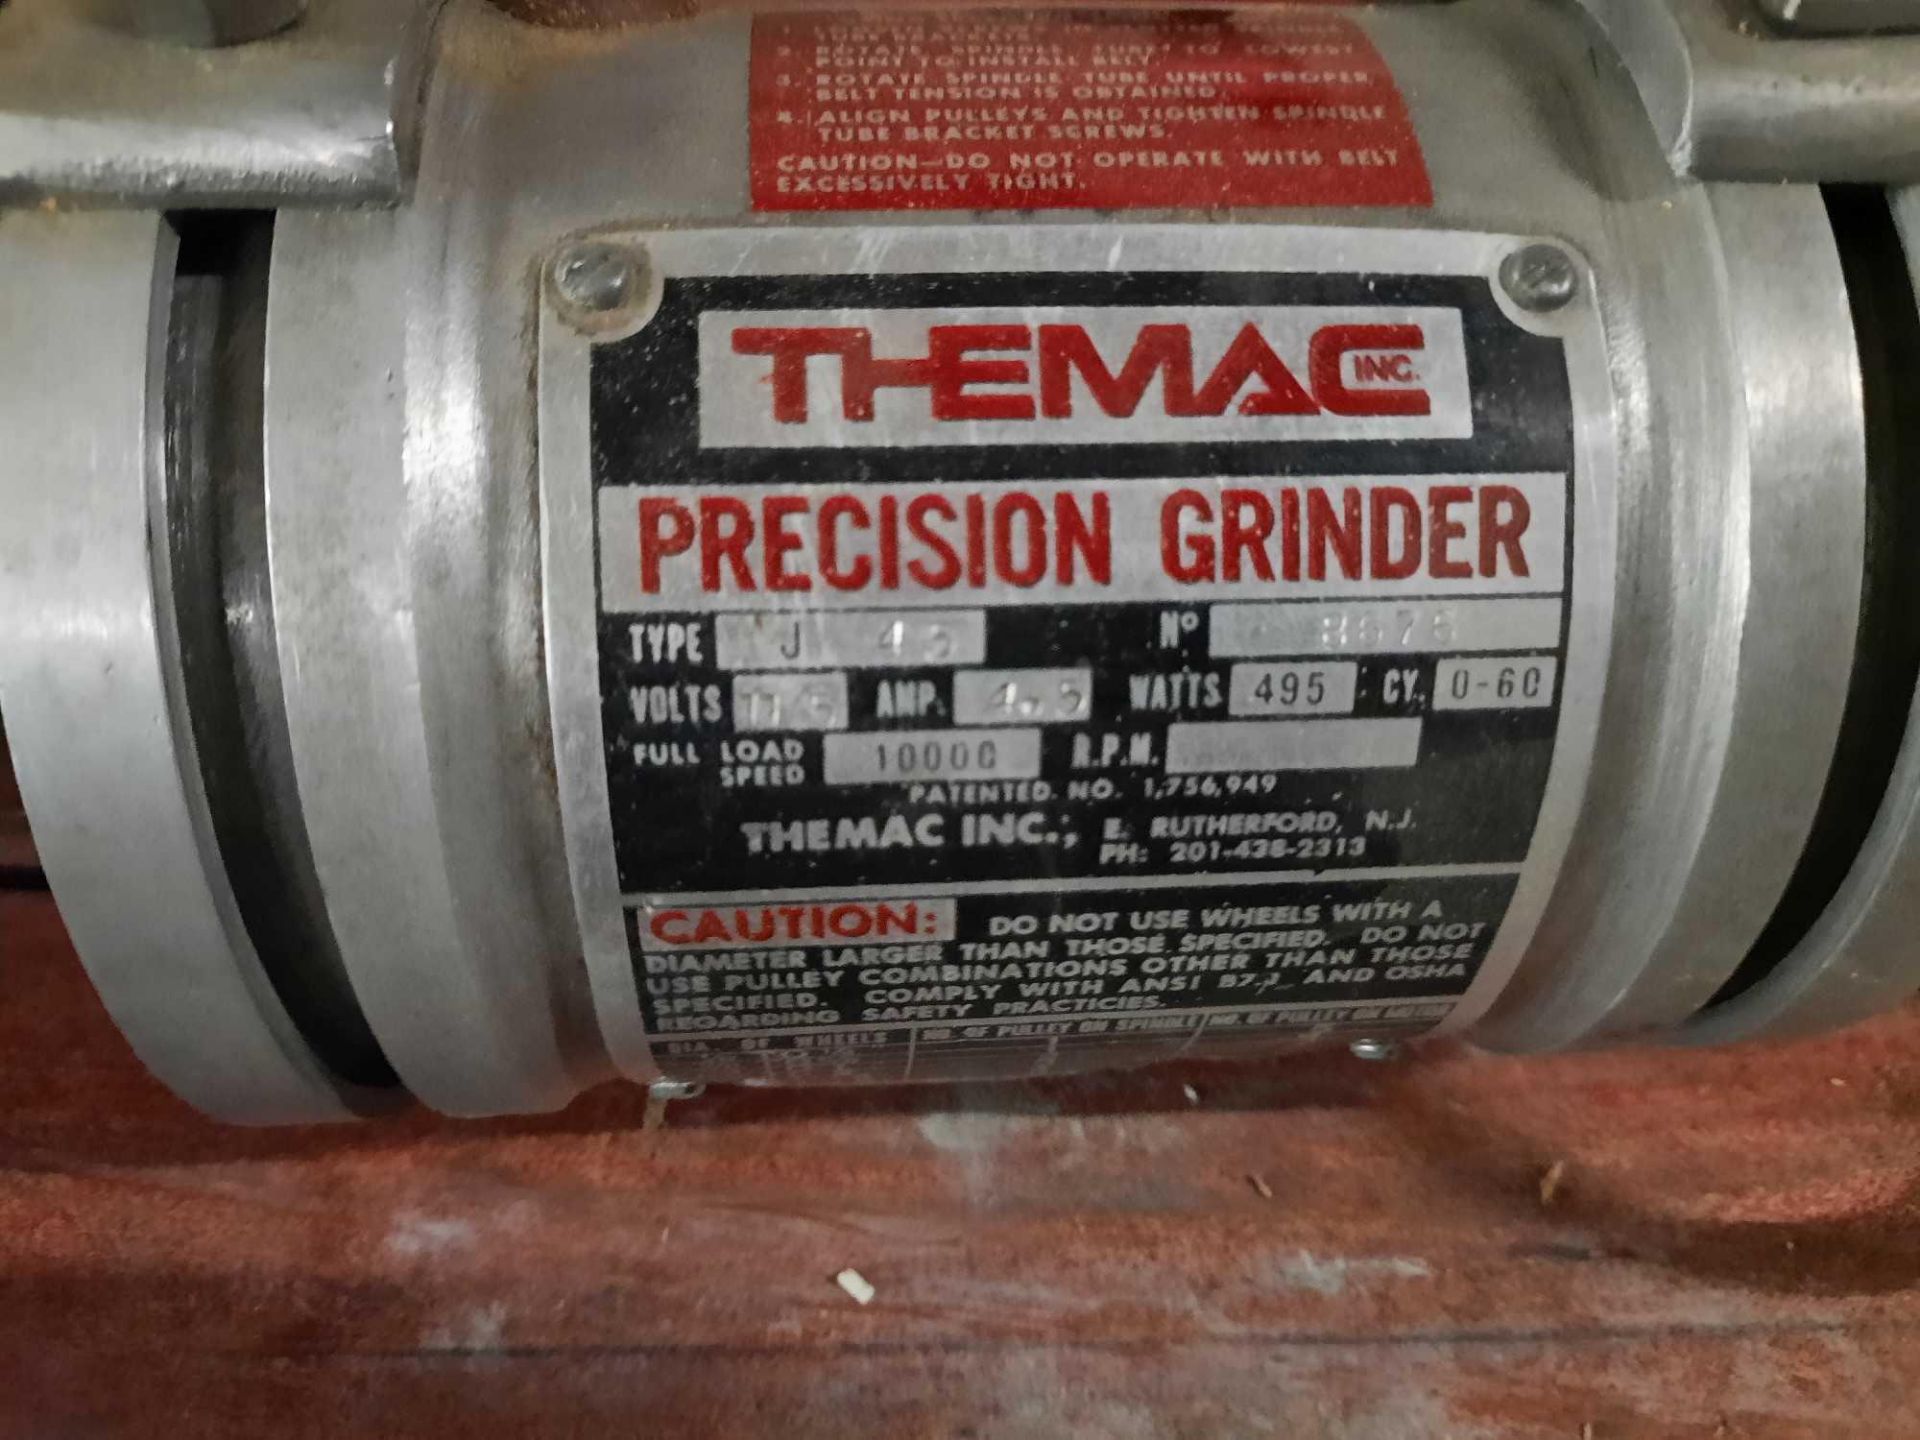 Thermac precision grinder, type J45, serial 8676, full load speed 10,000rpm, 1/2 inch arbor, 4.5amp, - Image 3 of 6